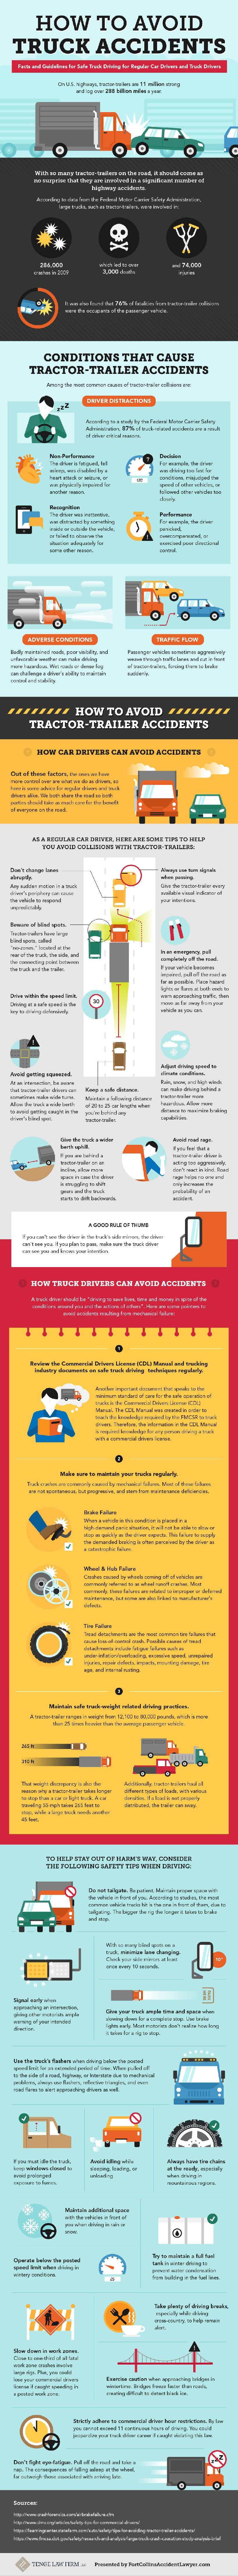 truck accidents and what causes them